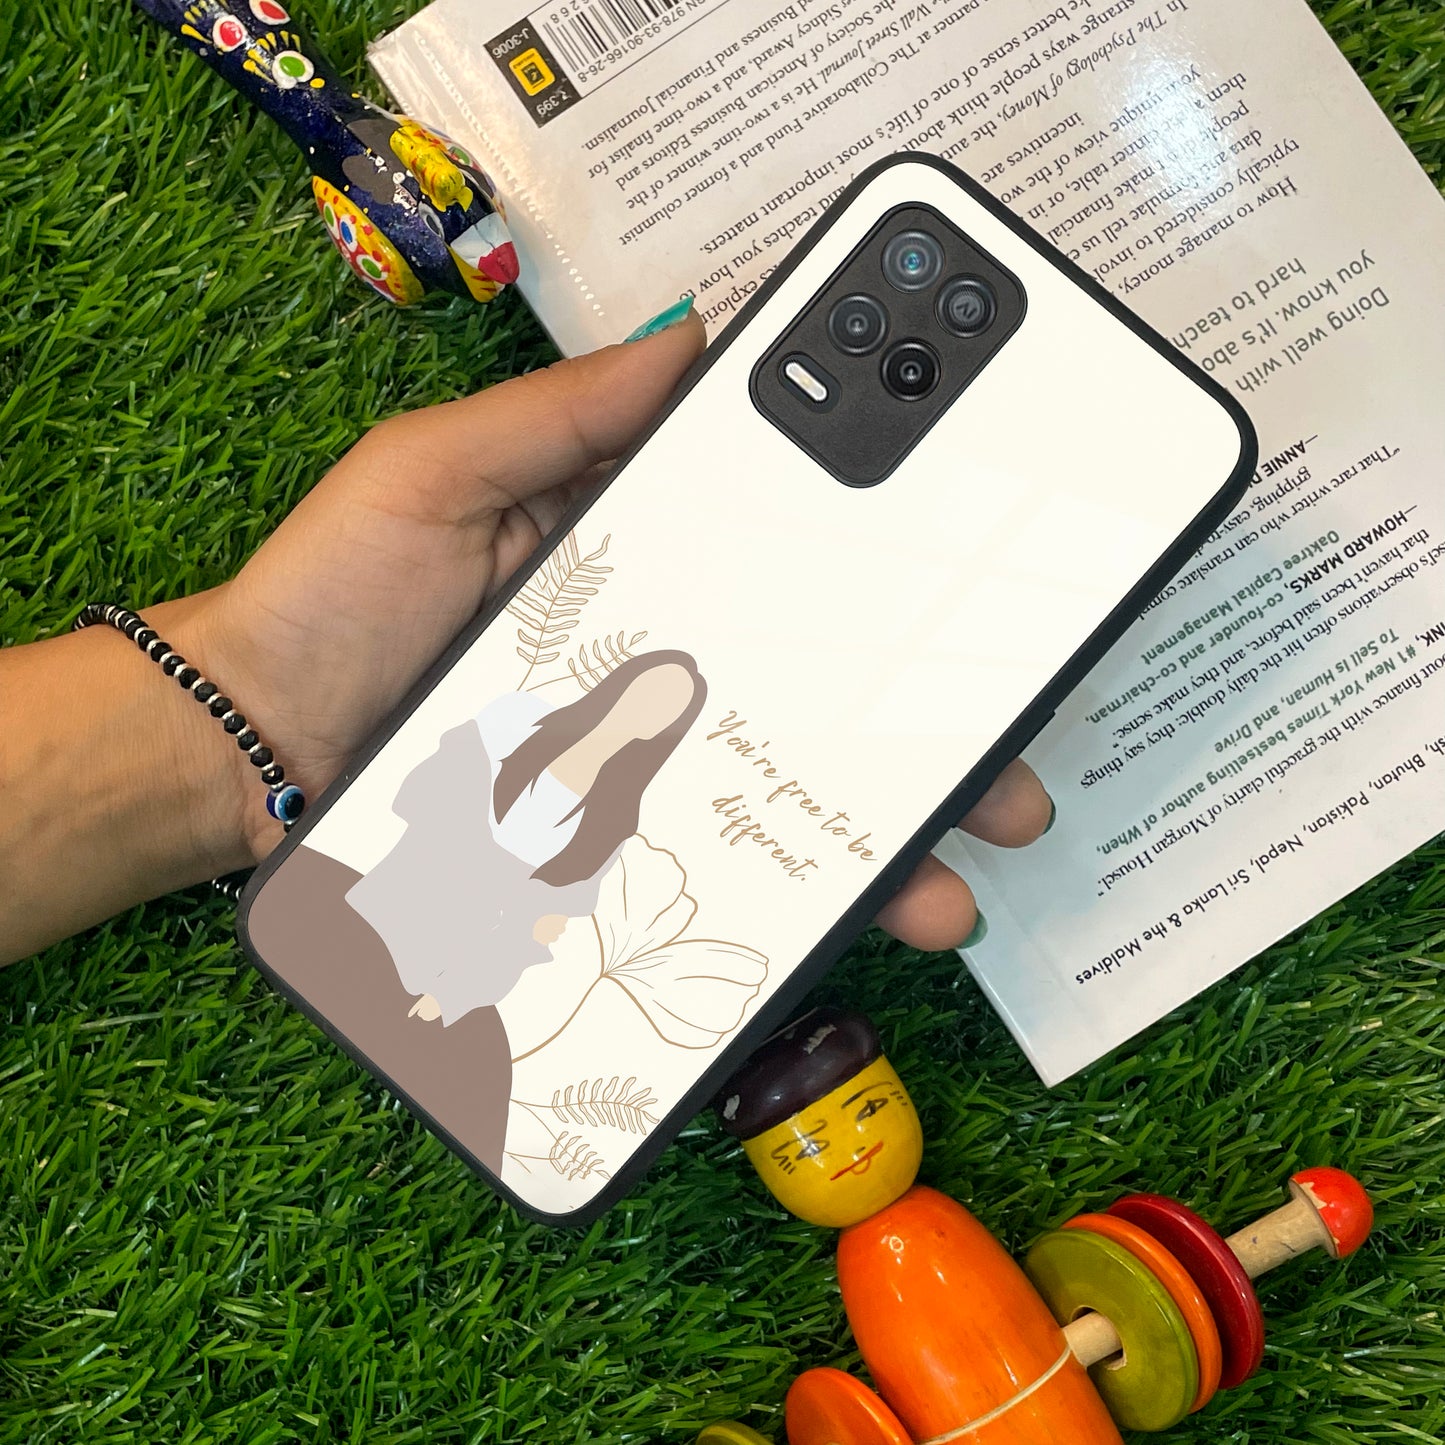 Always Stay Humble And Kind Glass Phone Cover V2 For Realme/Narzo